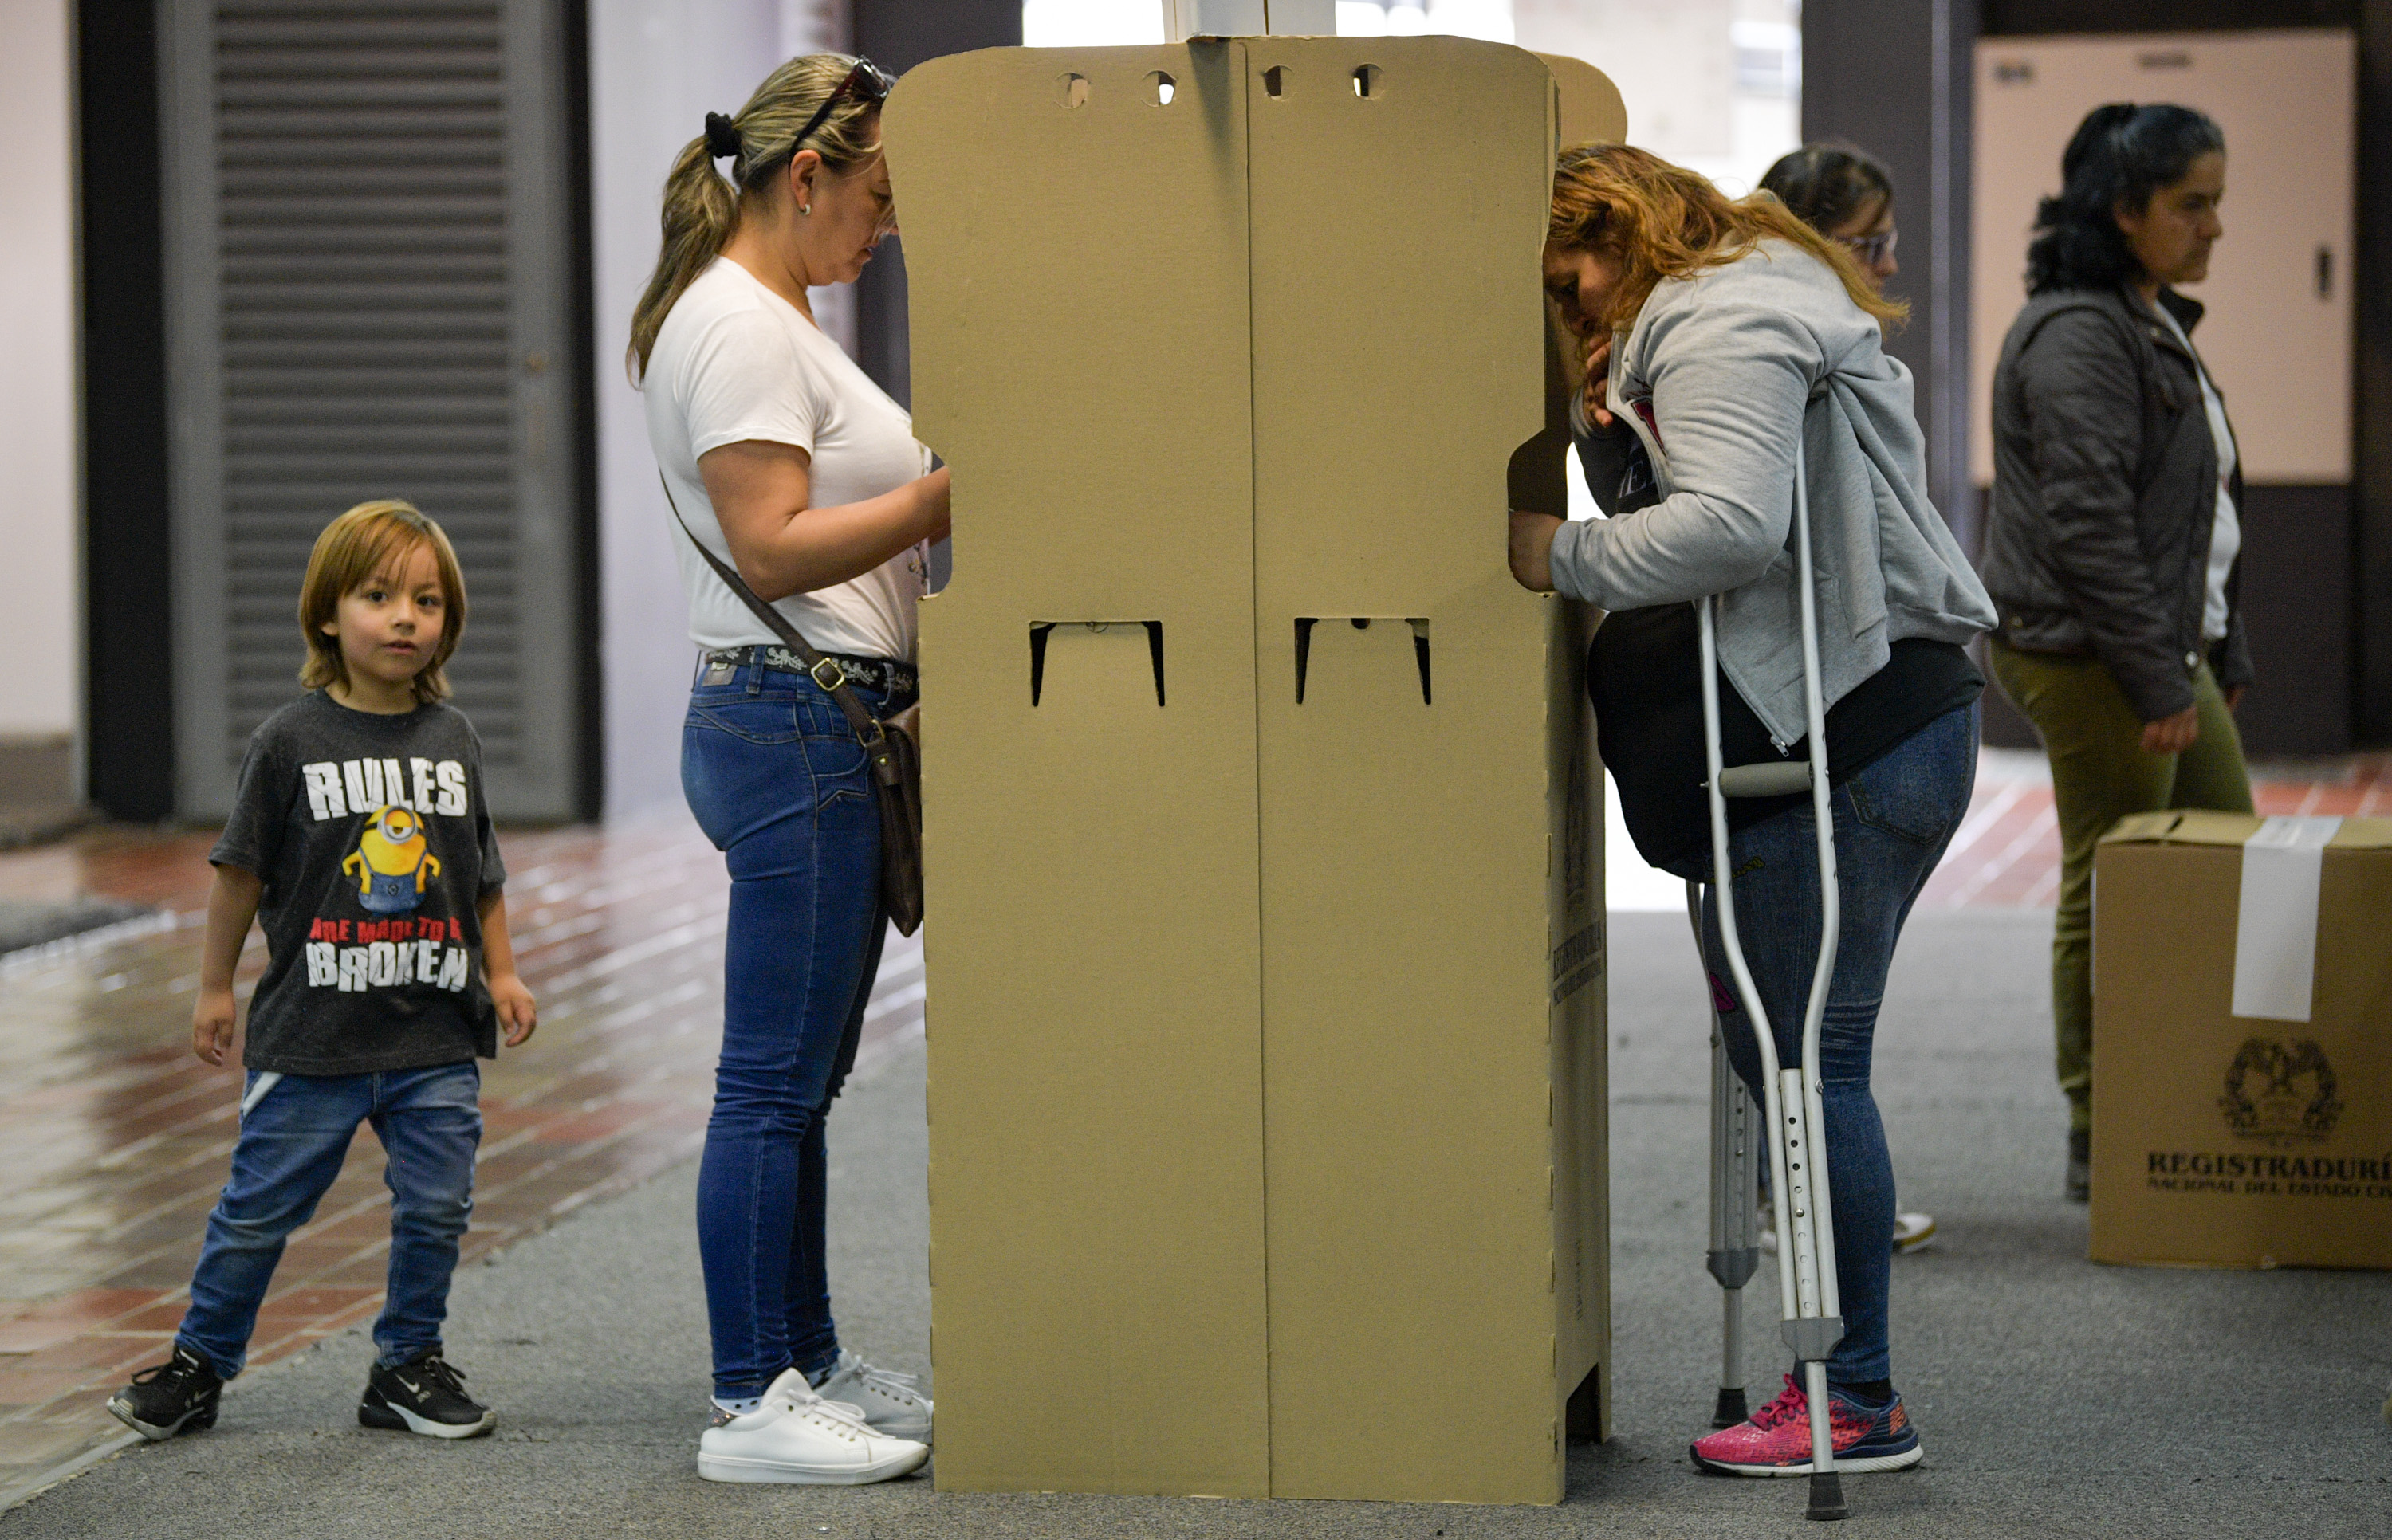 A women cast their vote at a polling station during regional elections in Bogota, Colombia on October 27, 2019. - Colombians choose their local authorities on Sunday after a campaign with multiple episodes of violence, without the traditional parties in a leading role and with the former FARC guerrilla competing during democratic elections for the second time. (Photo by Raul ARBOLEDA / AFP)